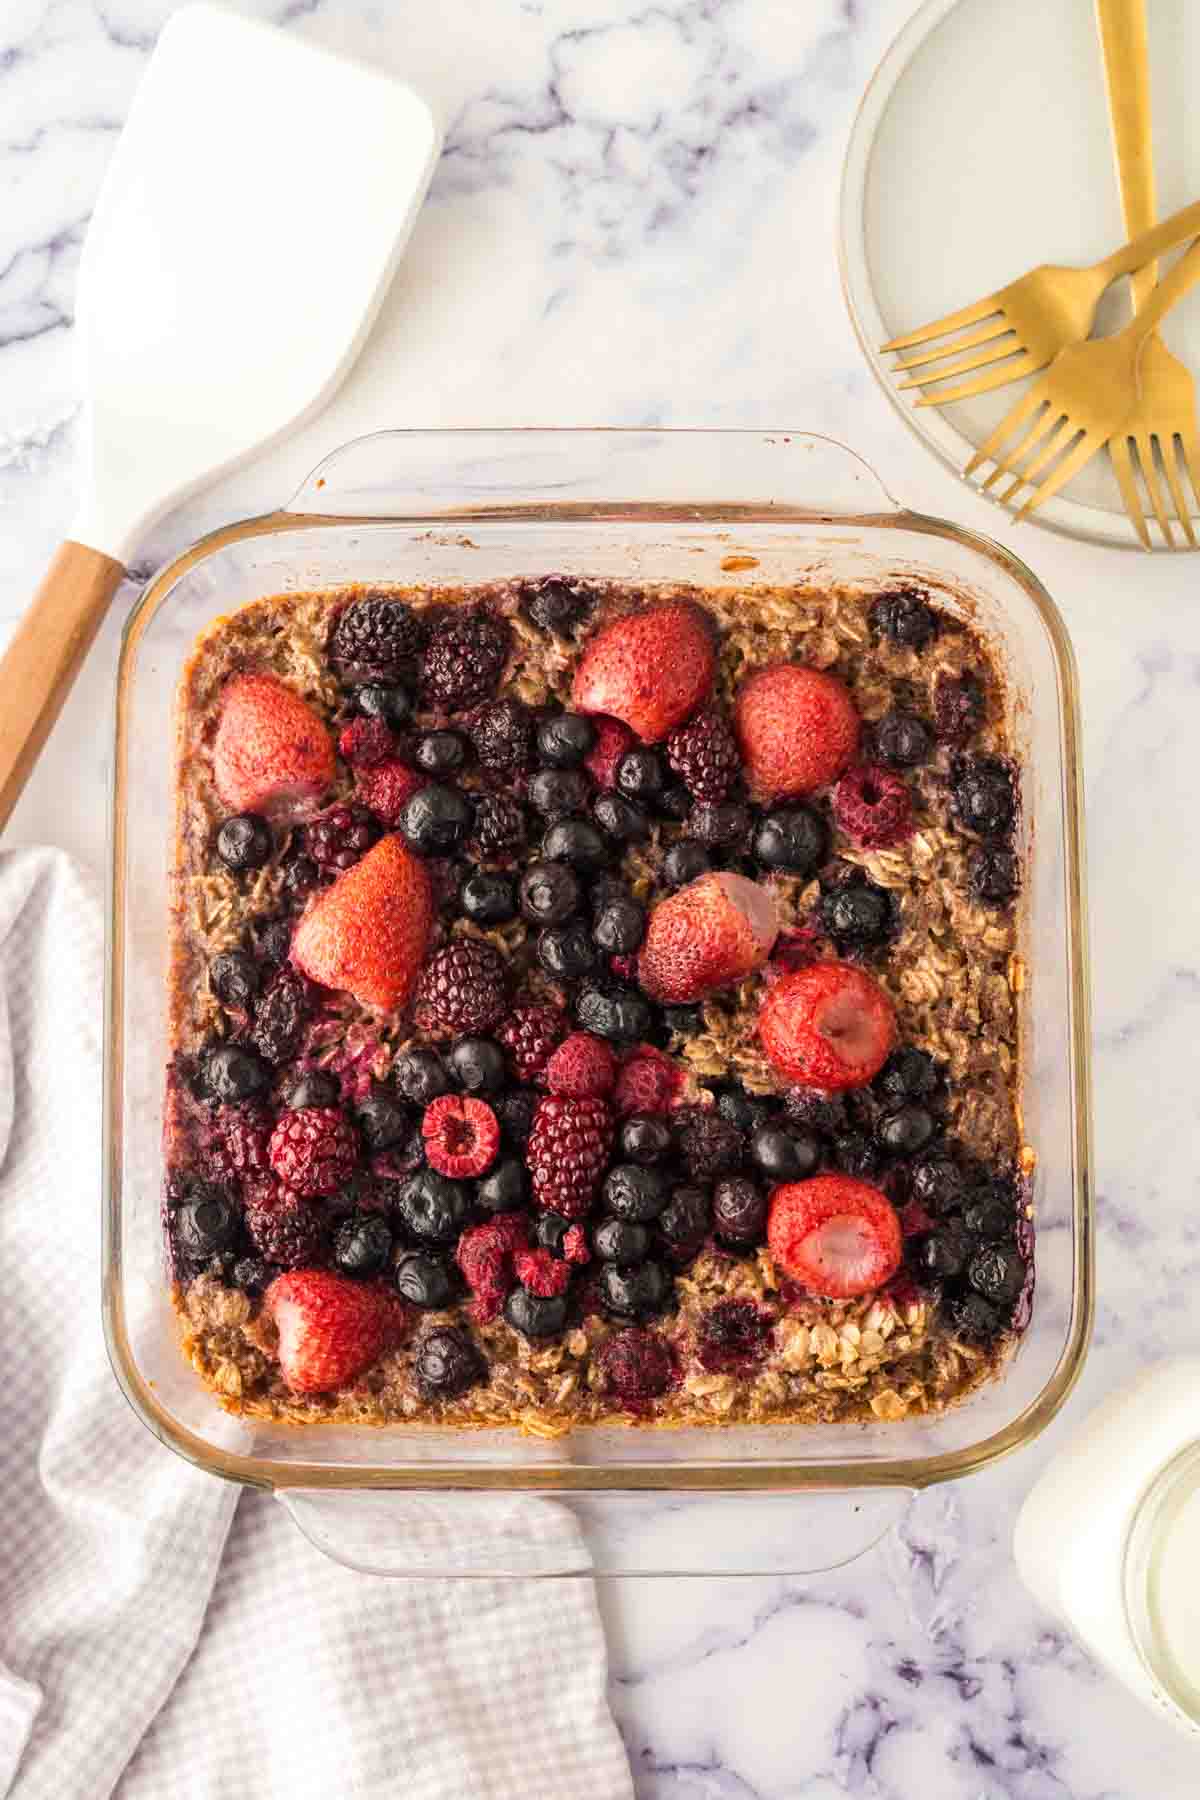 clear square casserole dish with baked oatmeal berries baked to a golden brown